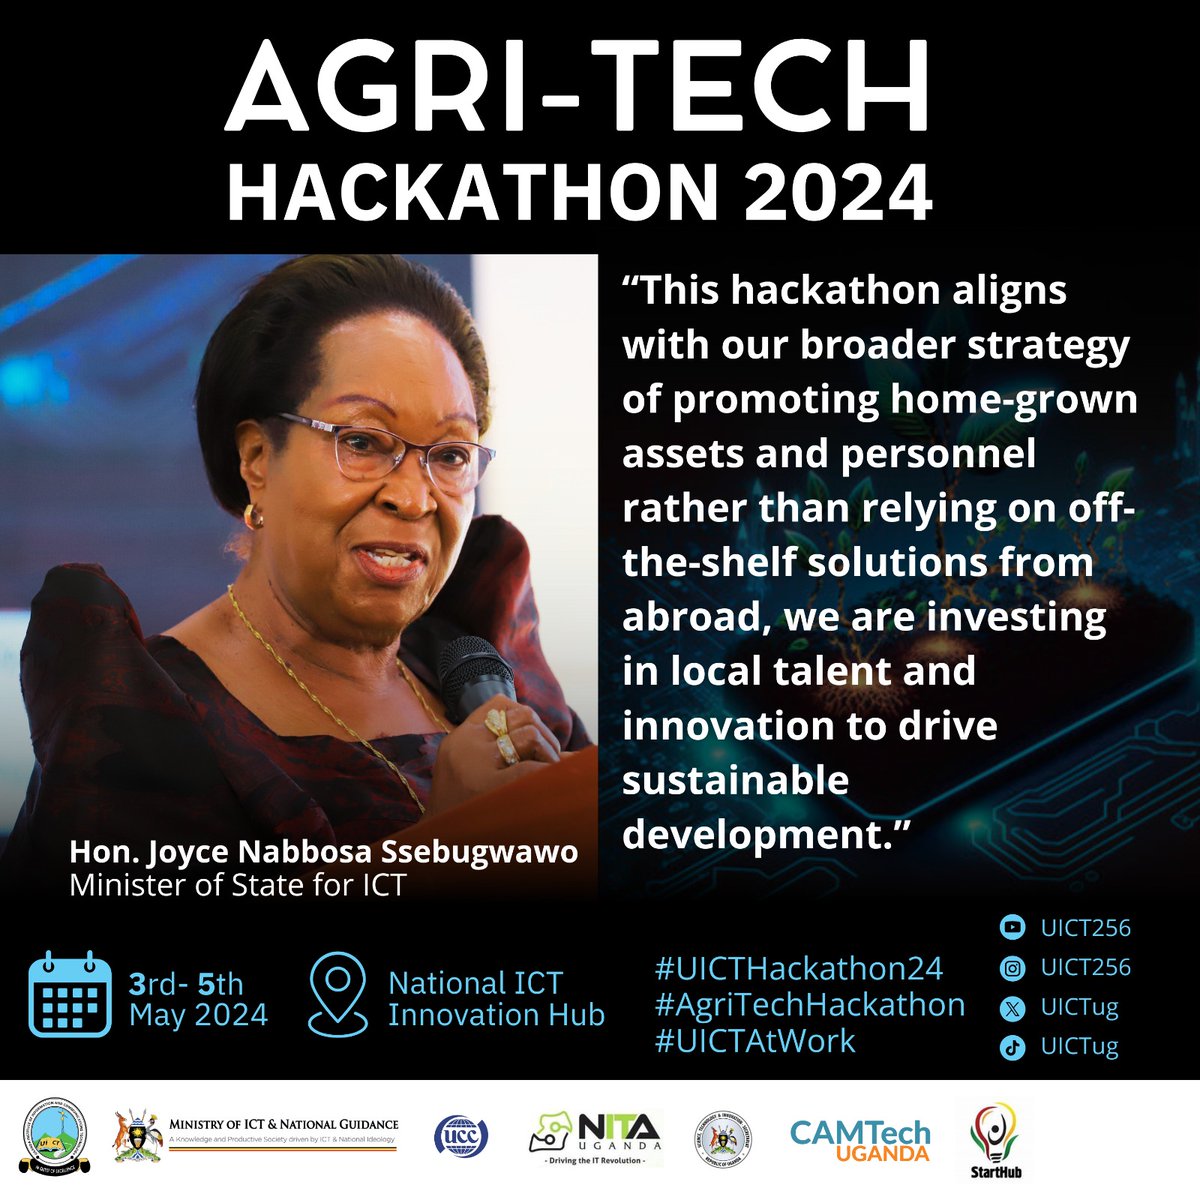 In line with the Uganda Vision 2040 & NDP III, #UICTHackathon24 aims to invest in local talent and innovation in order to accelerate sustainable development. #AgricTechHackathon #UICTAtWork @PrincipalUICT @UCC_ED @Educ_SportsUg @NITAUgandaED @InnovationHubUg @MosesWatasa